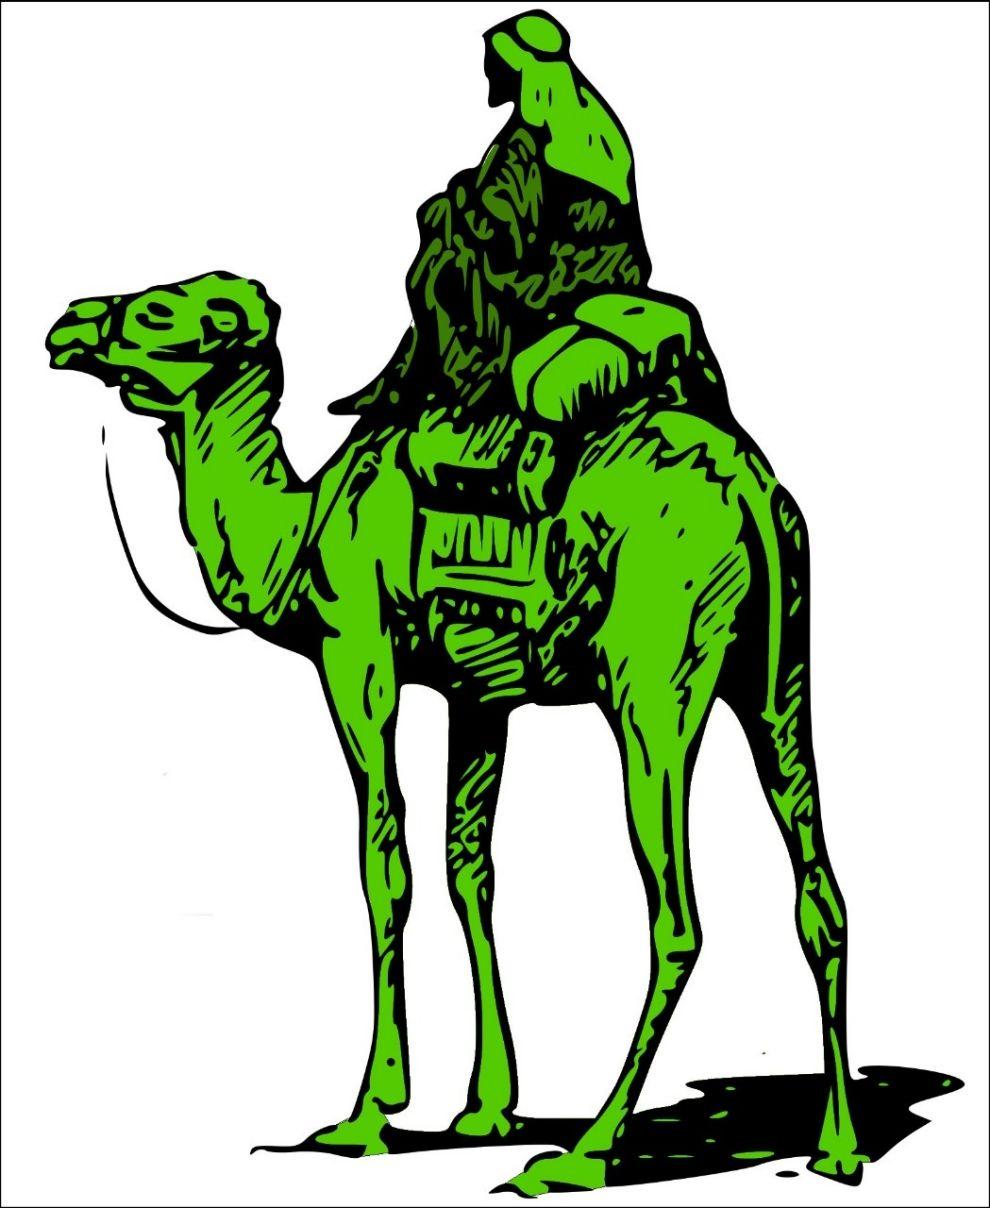 Silkroad Logo - FBI sting and faked death may have played key role in Silk Road ...